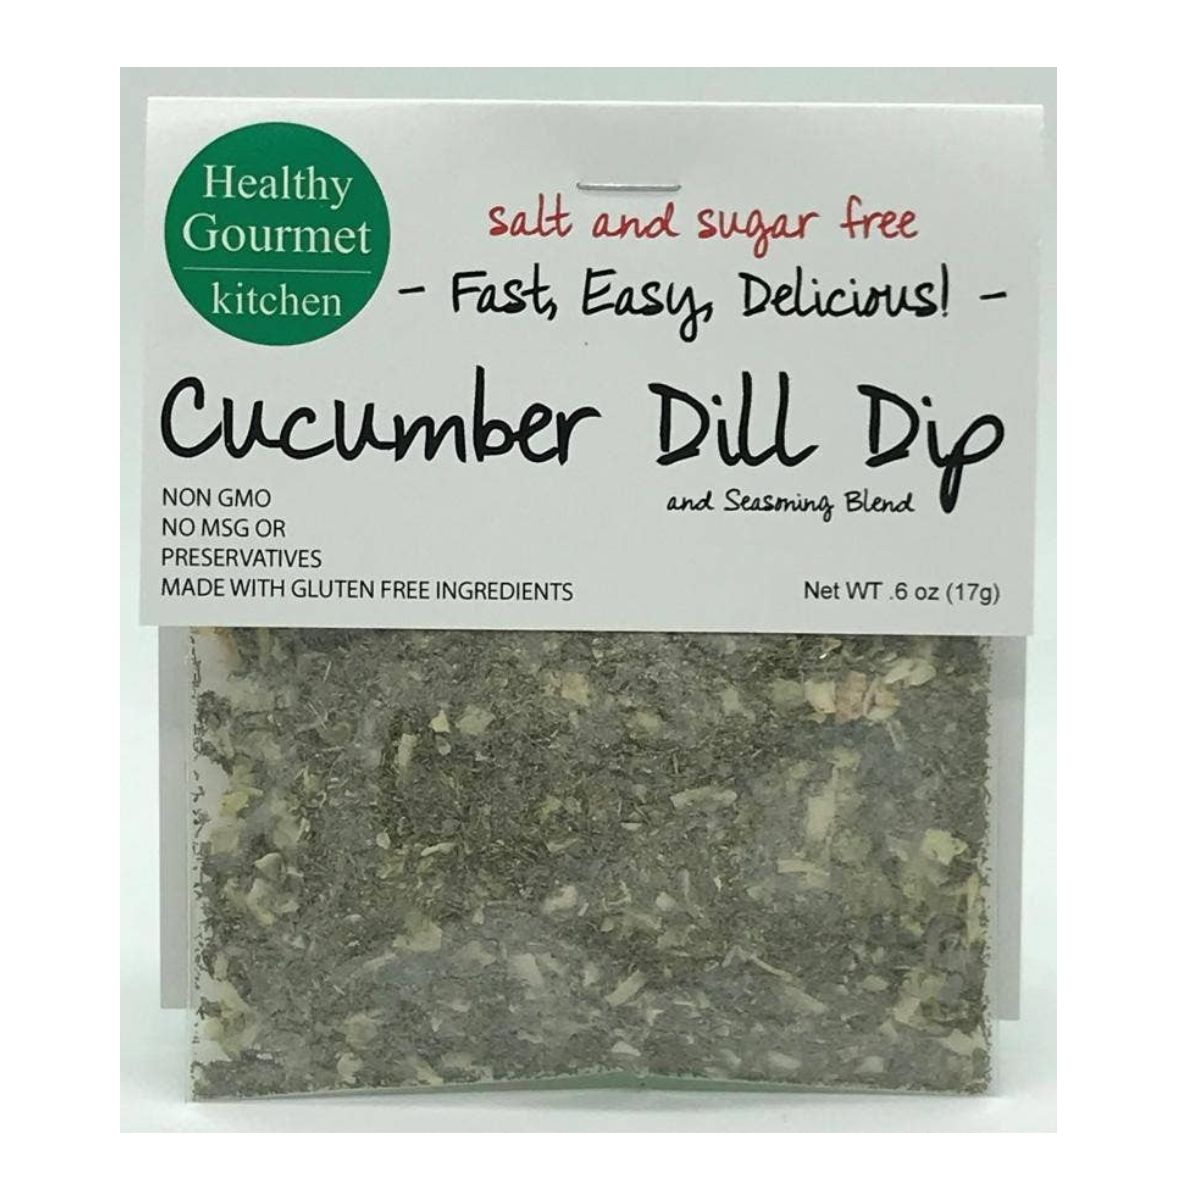 Cucumber Dill Dip Mix- Great for entertaining